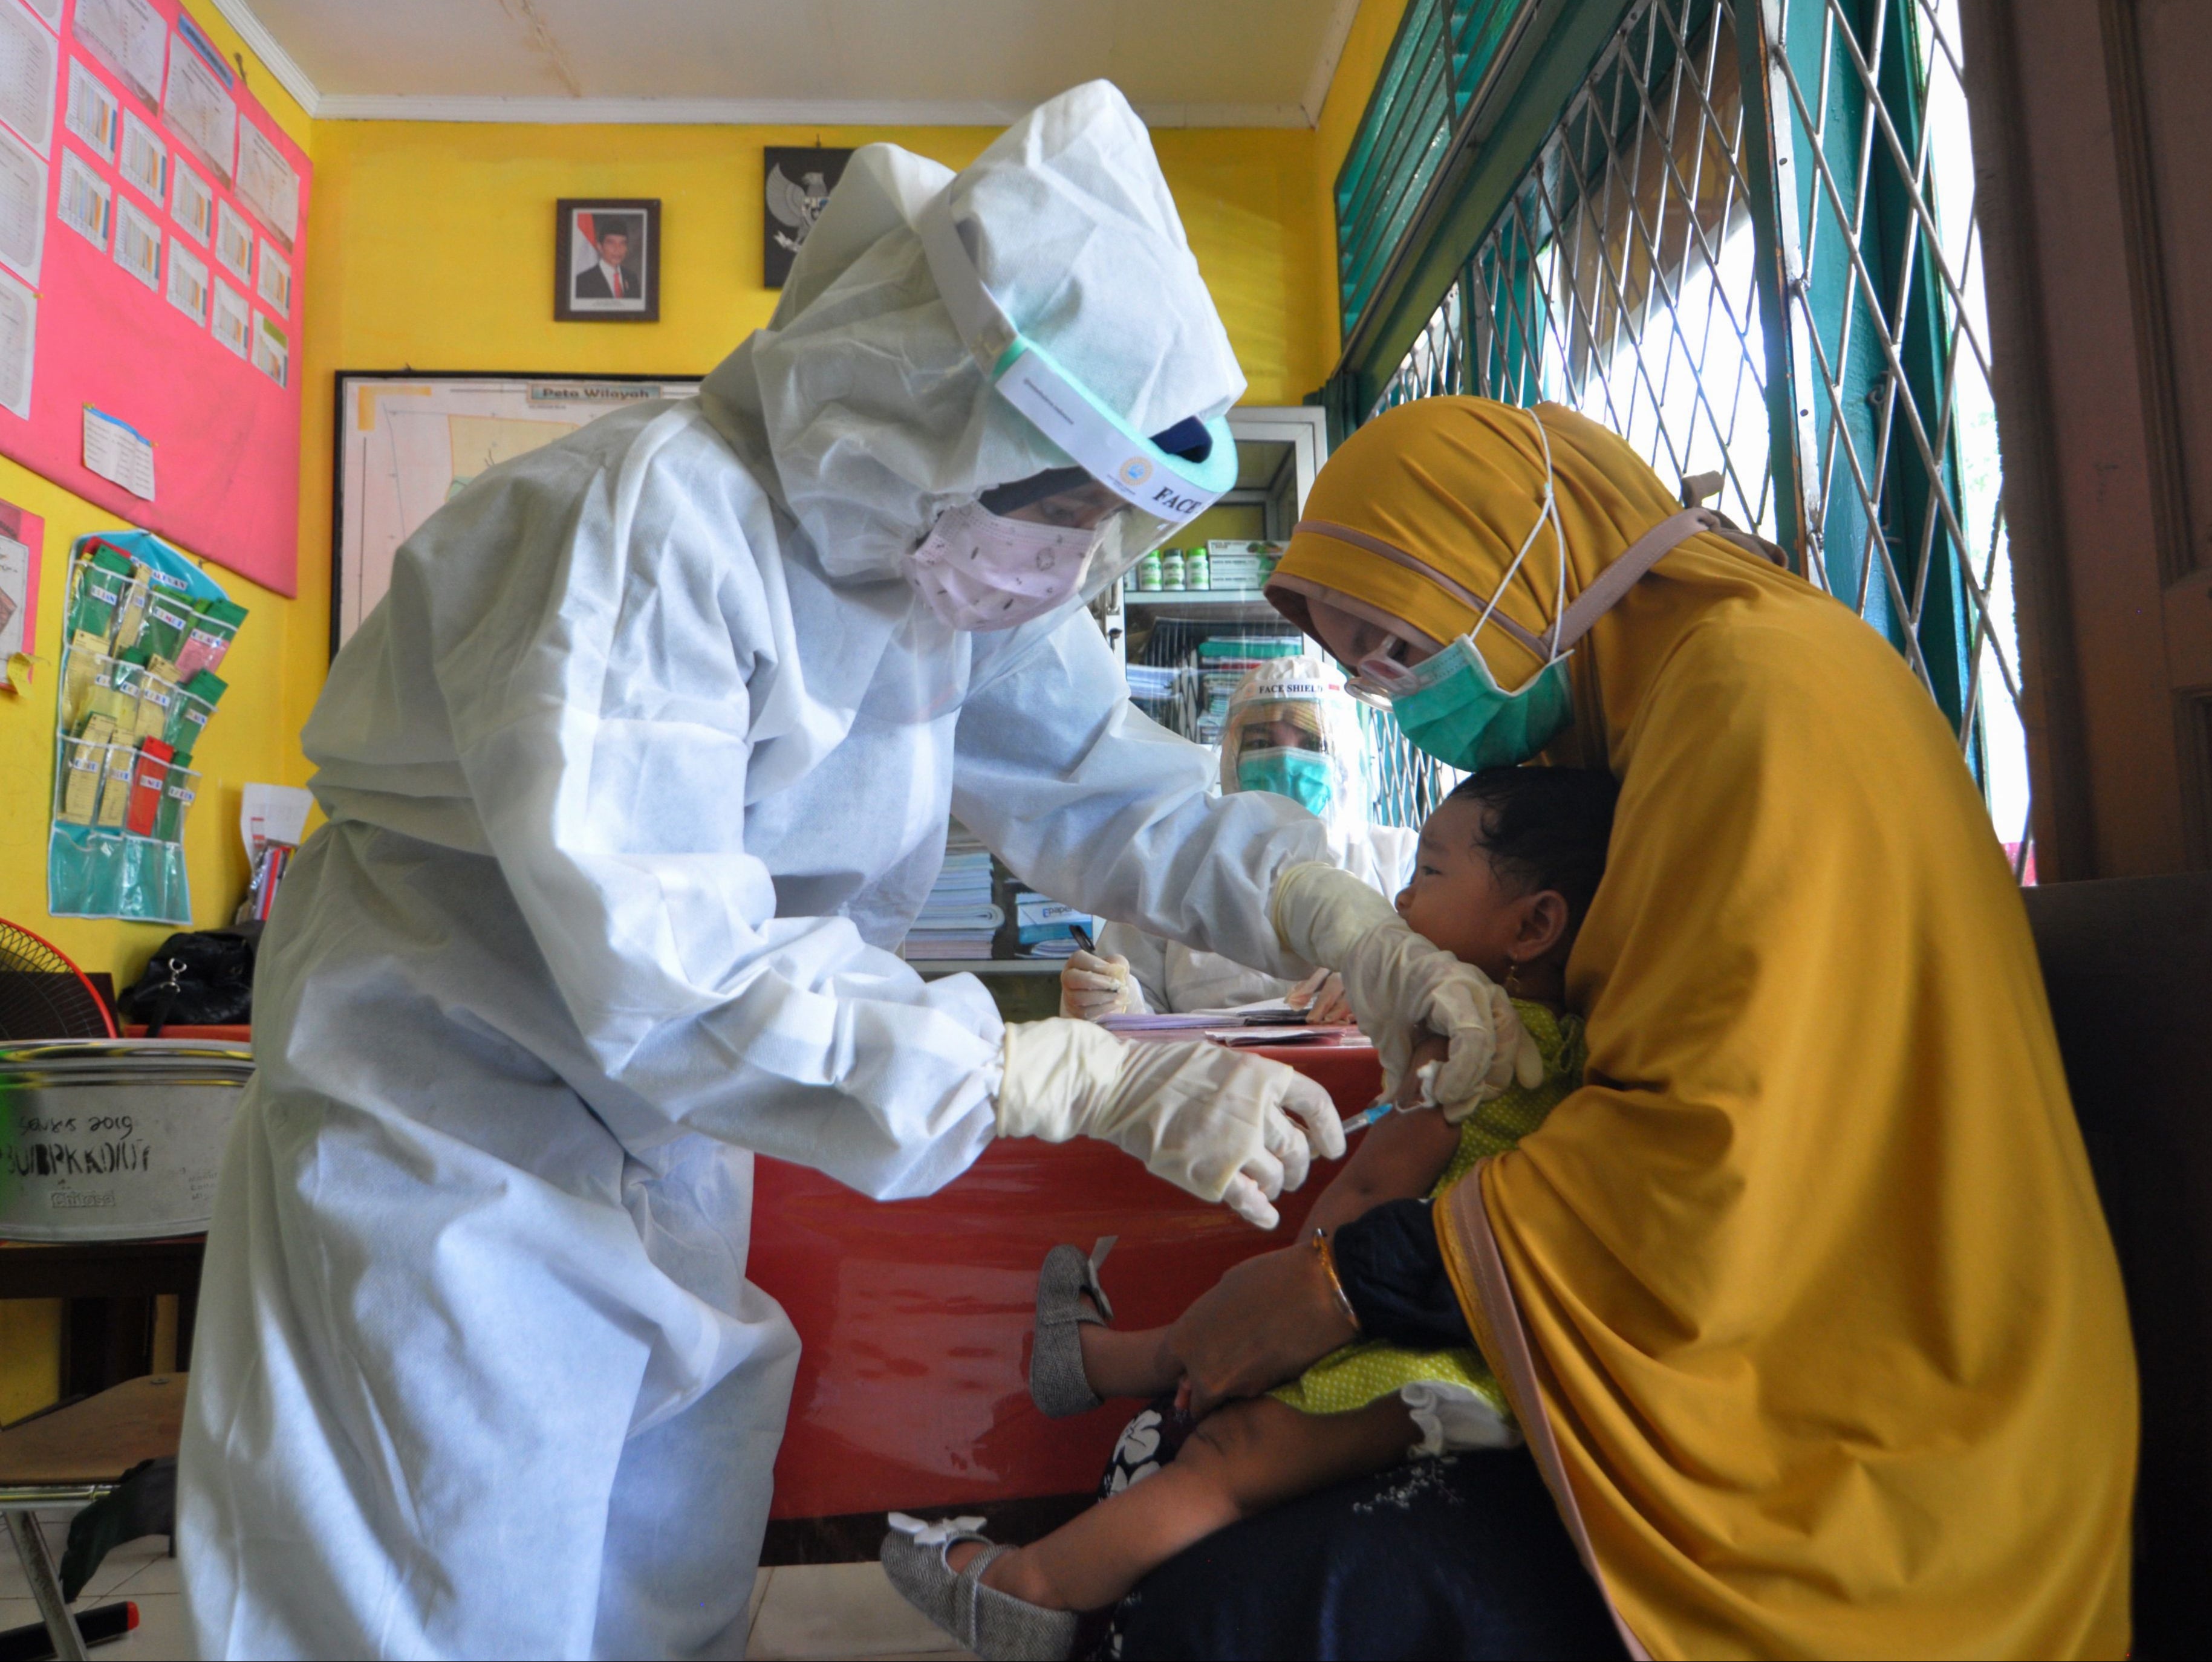 Nurses wearing protective gear administer a vaccine against measles to a child at a health centre in Palu, Indonesia